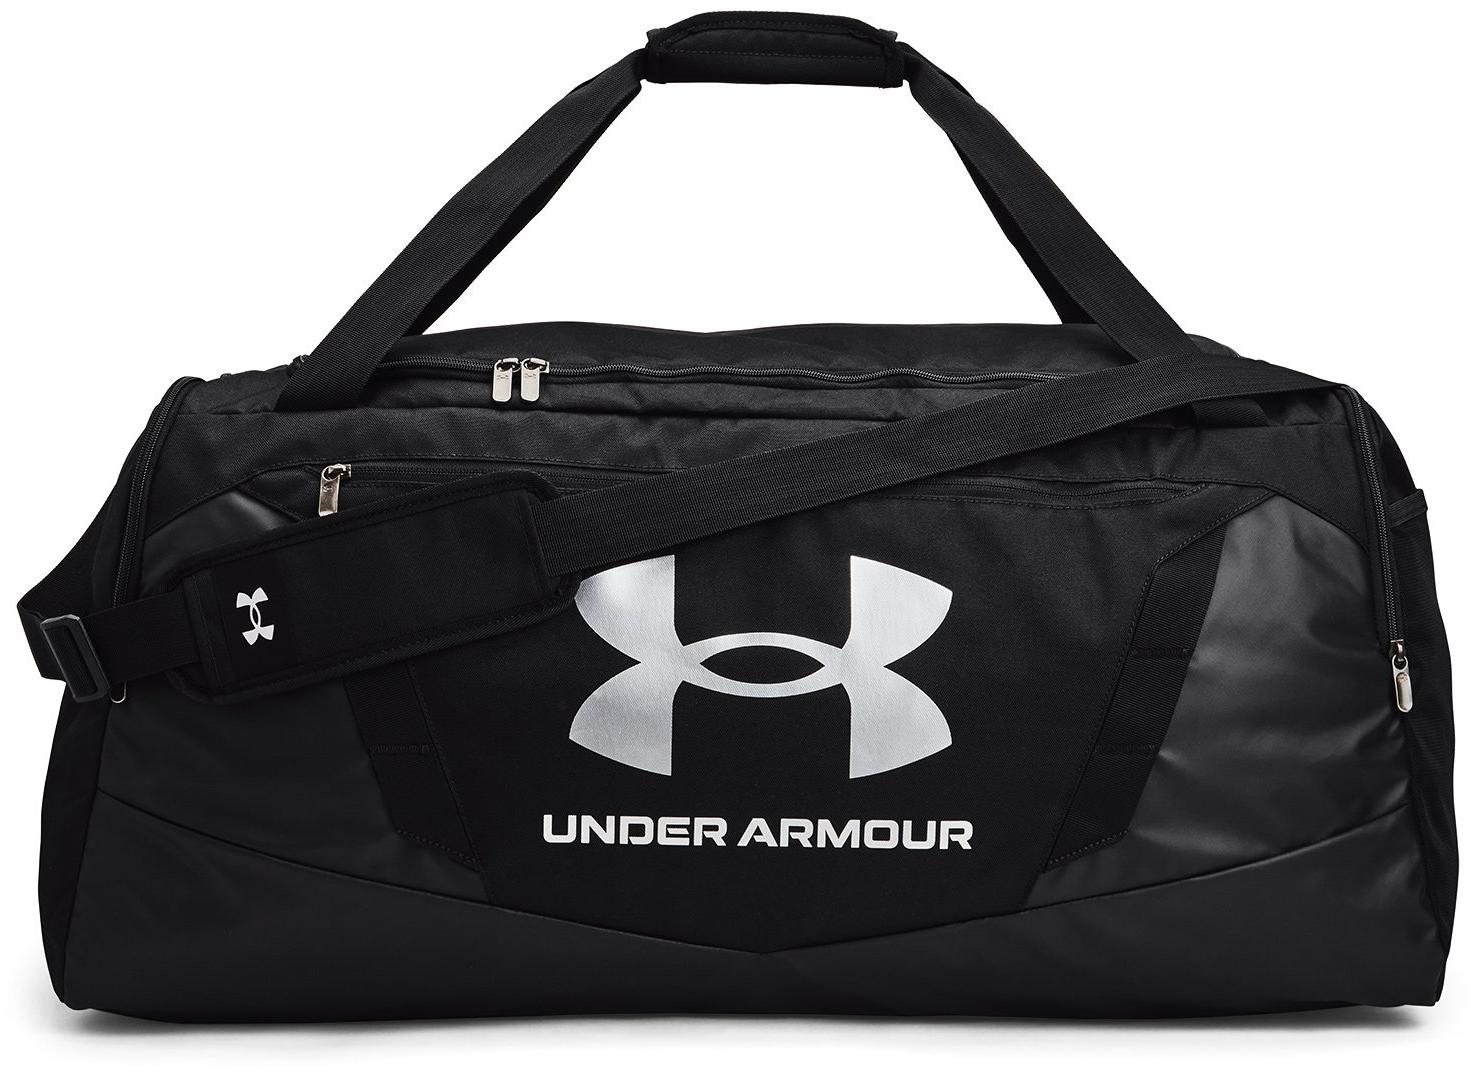 Under Armour Undeniable 5.0 Duffle Lg